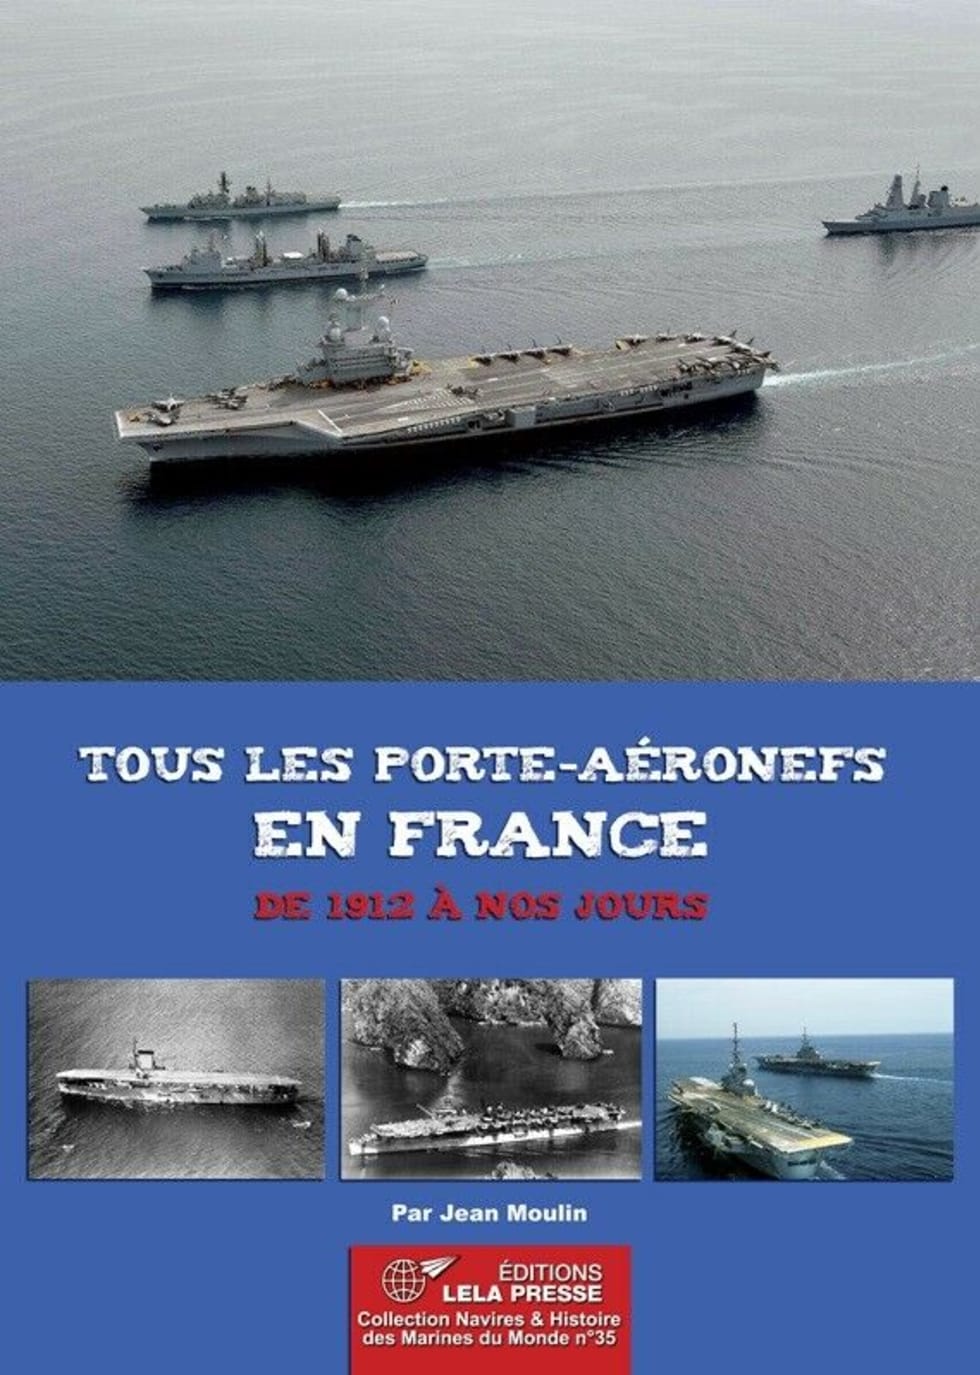 Bookcover “Every aircraft carrier in France, from 1912 to today”